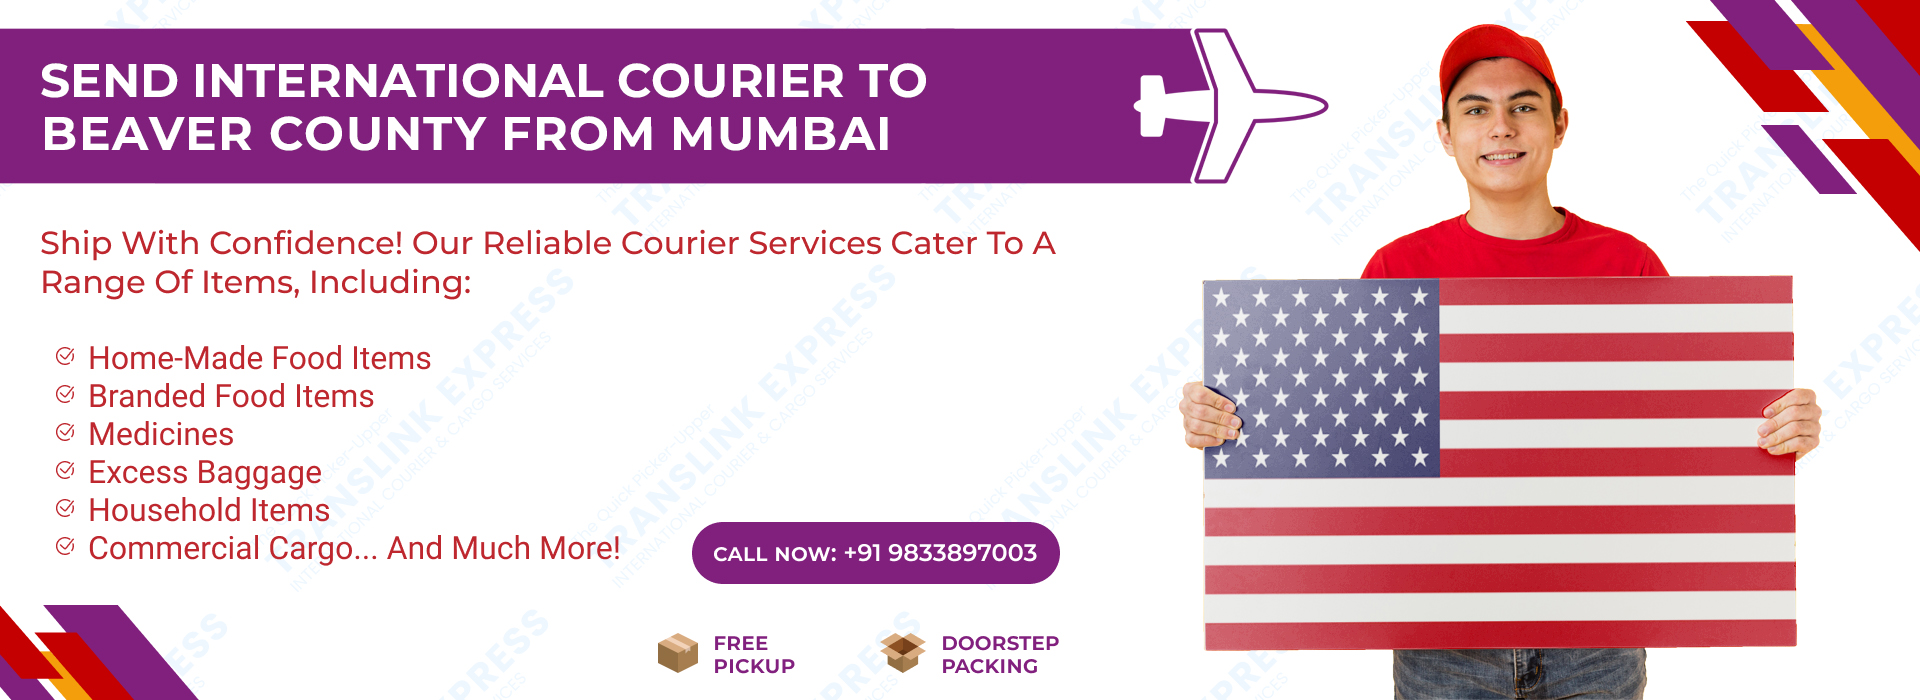 Courier to Beaver County From Mumbai